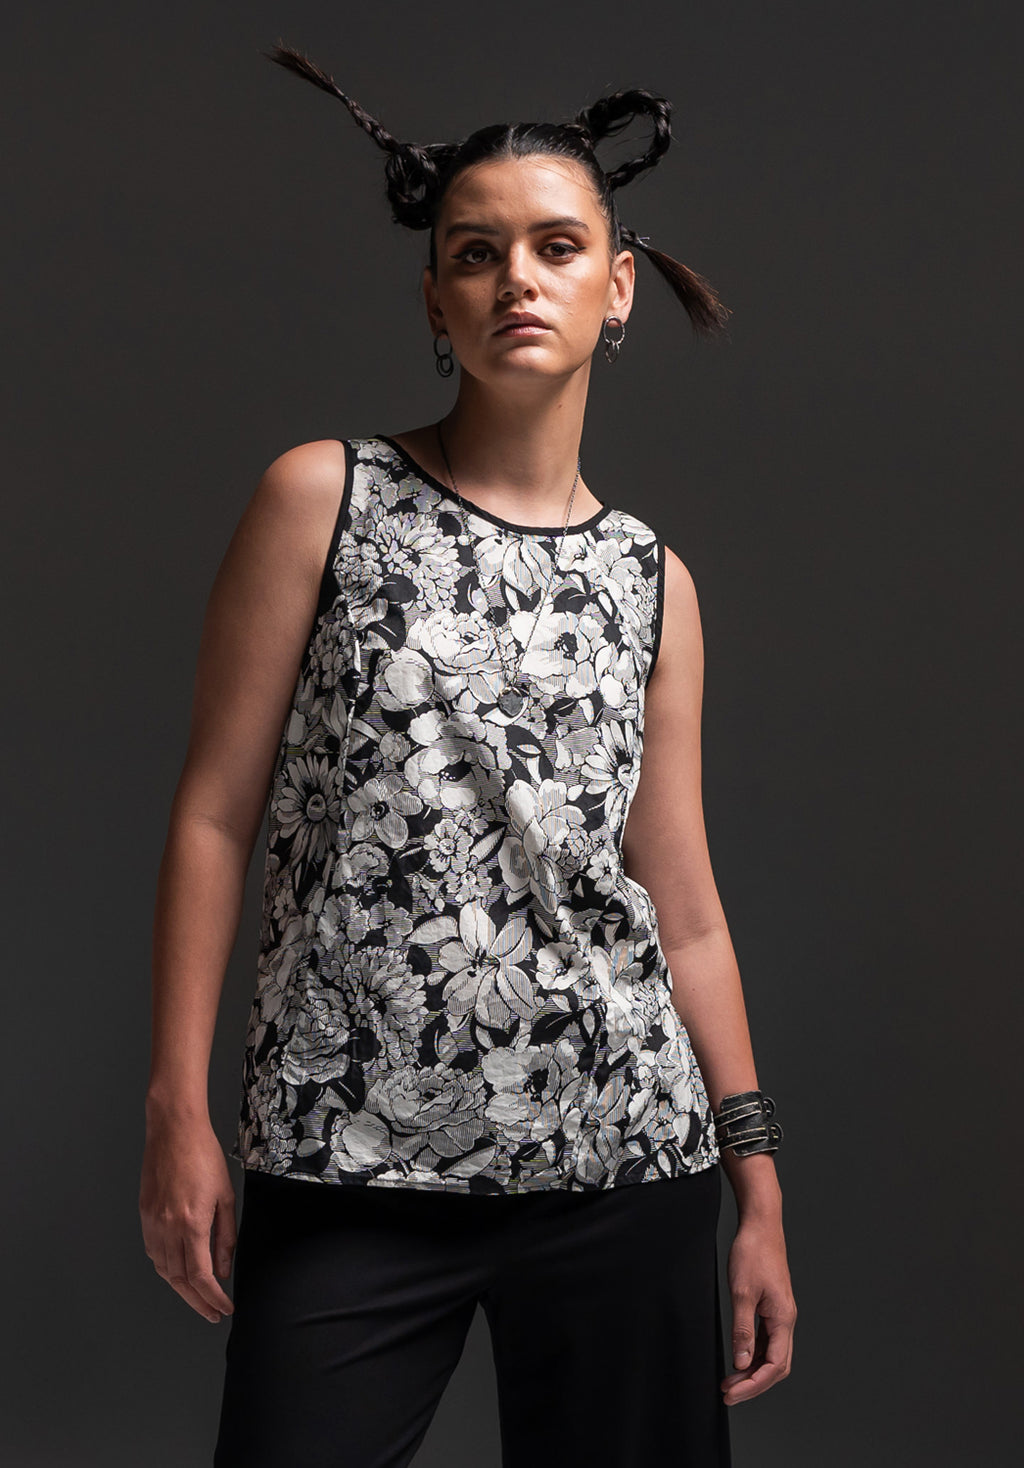 floral print tops, austrlaian made clothing online